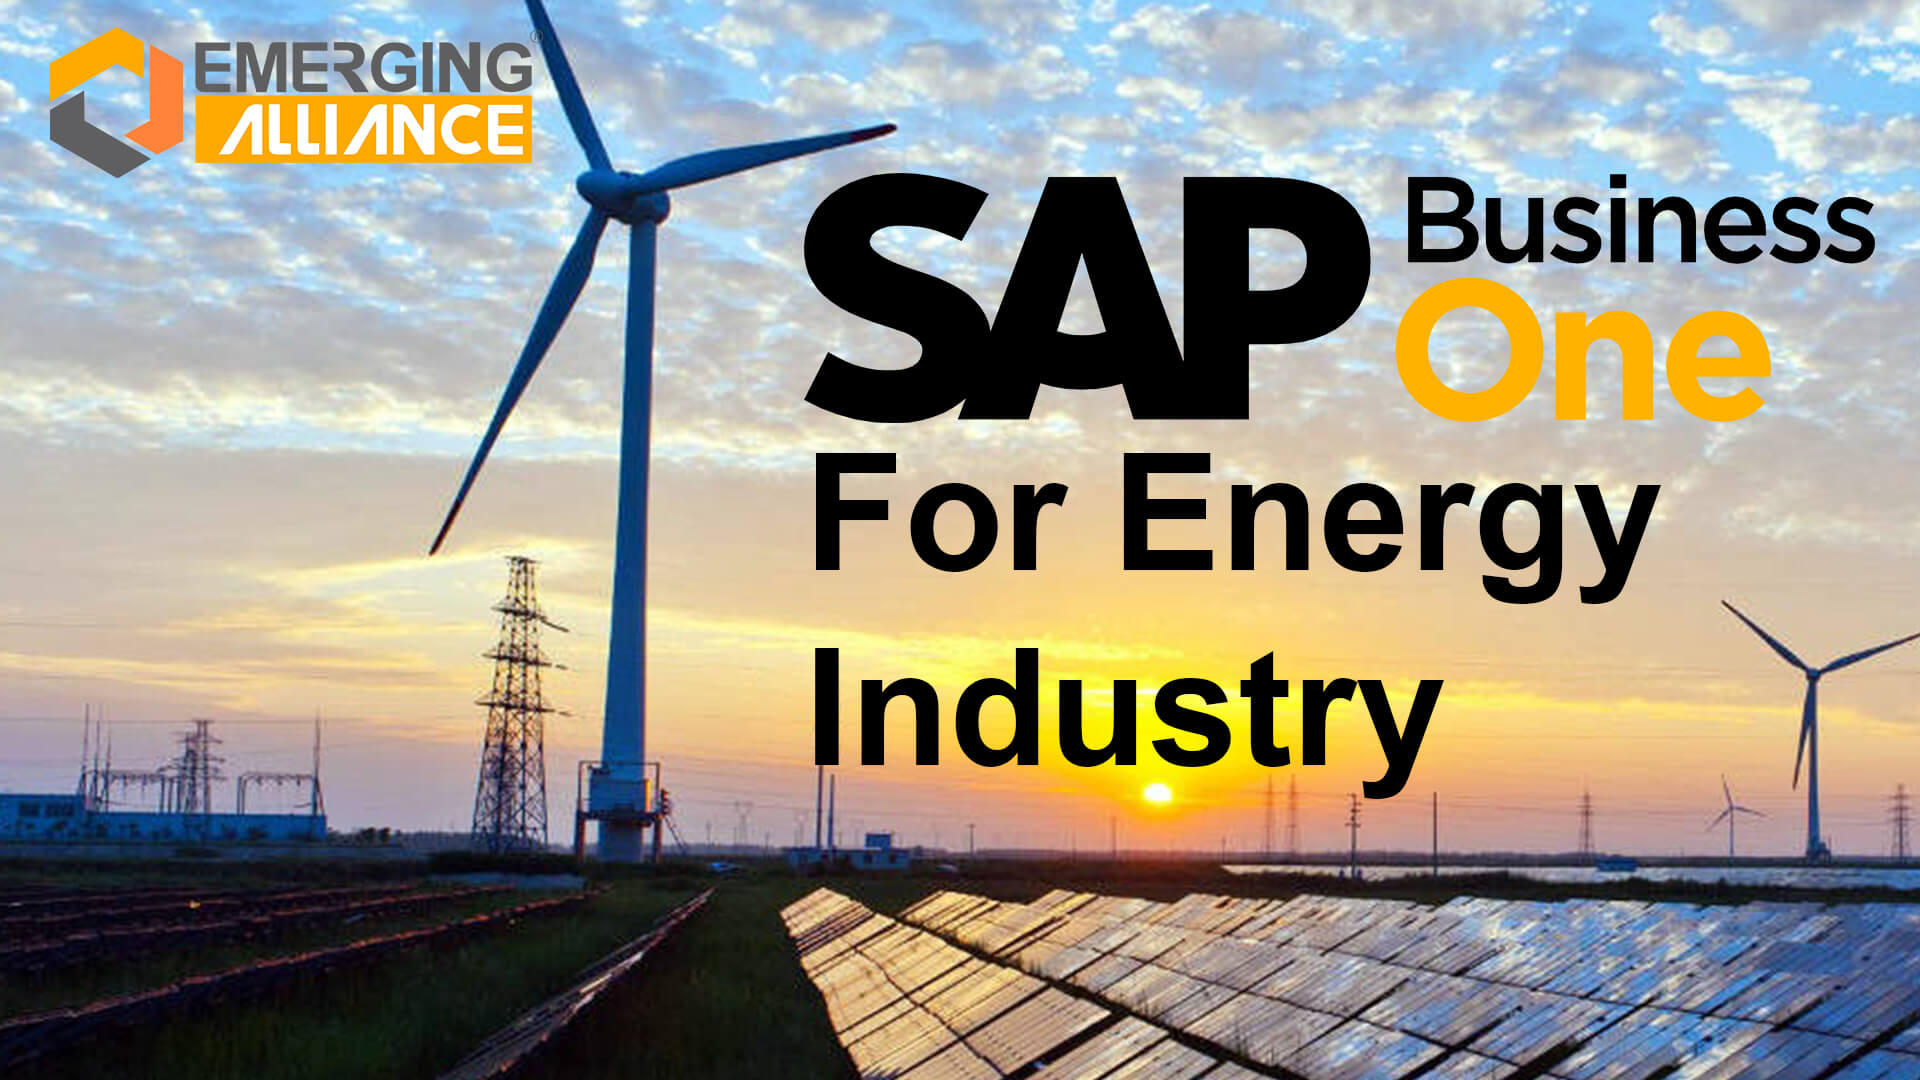 sap business one for energy industry